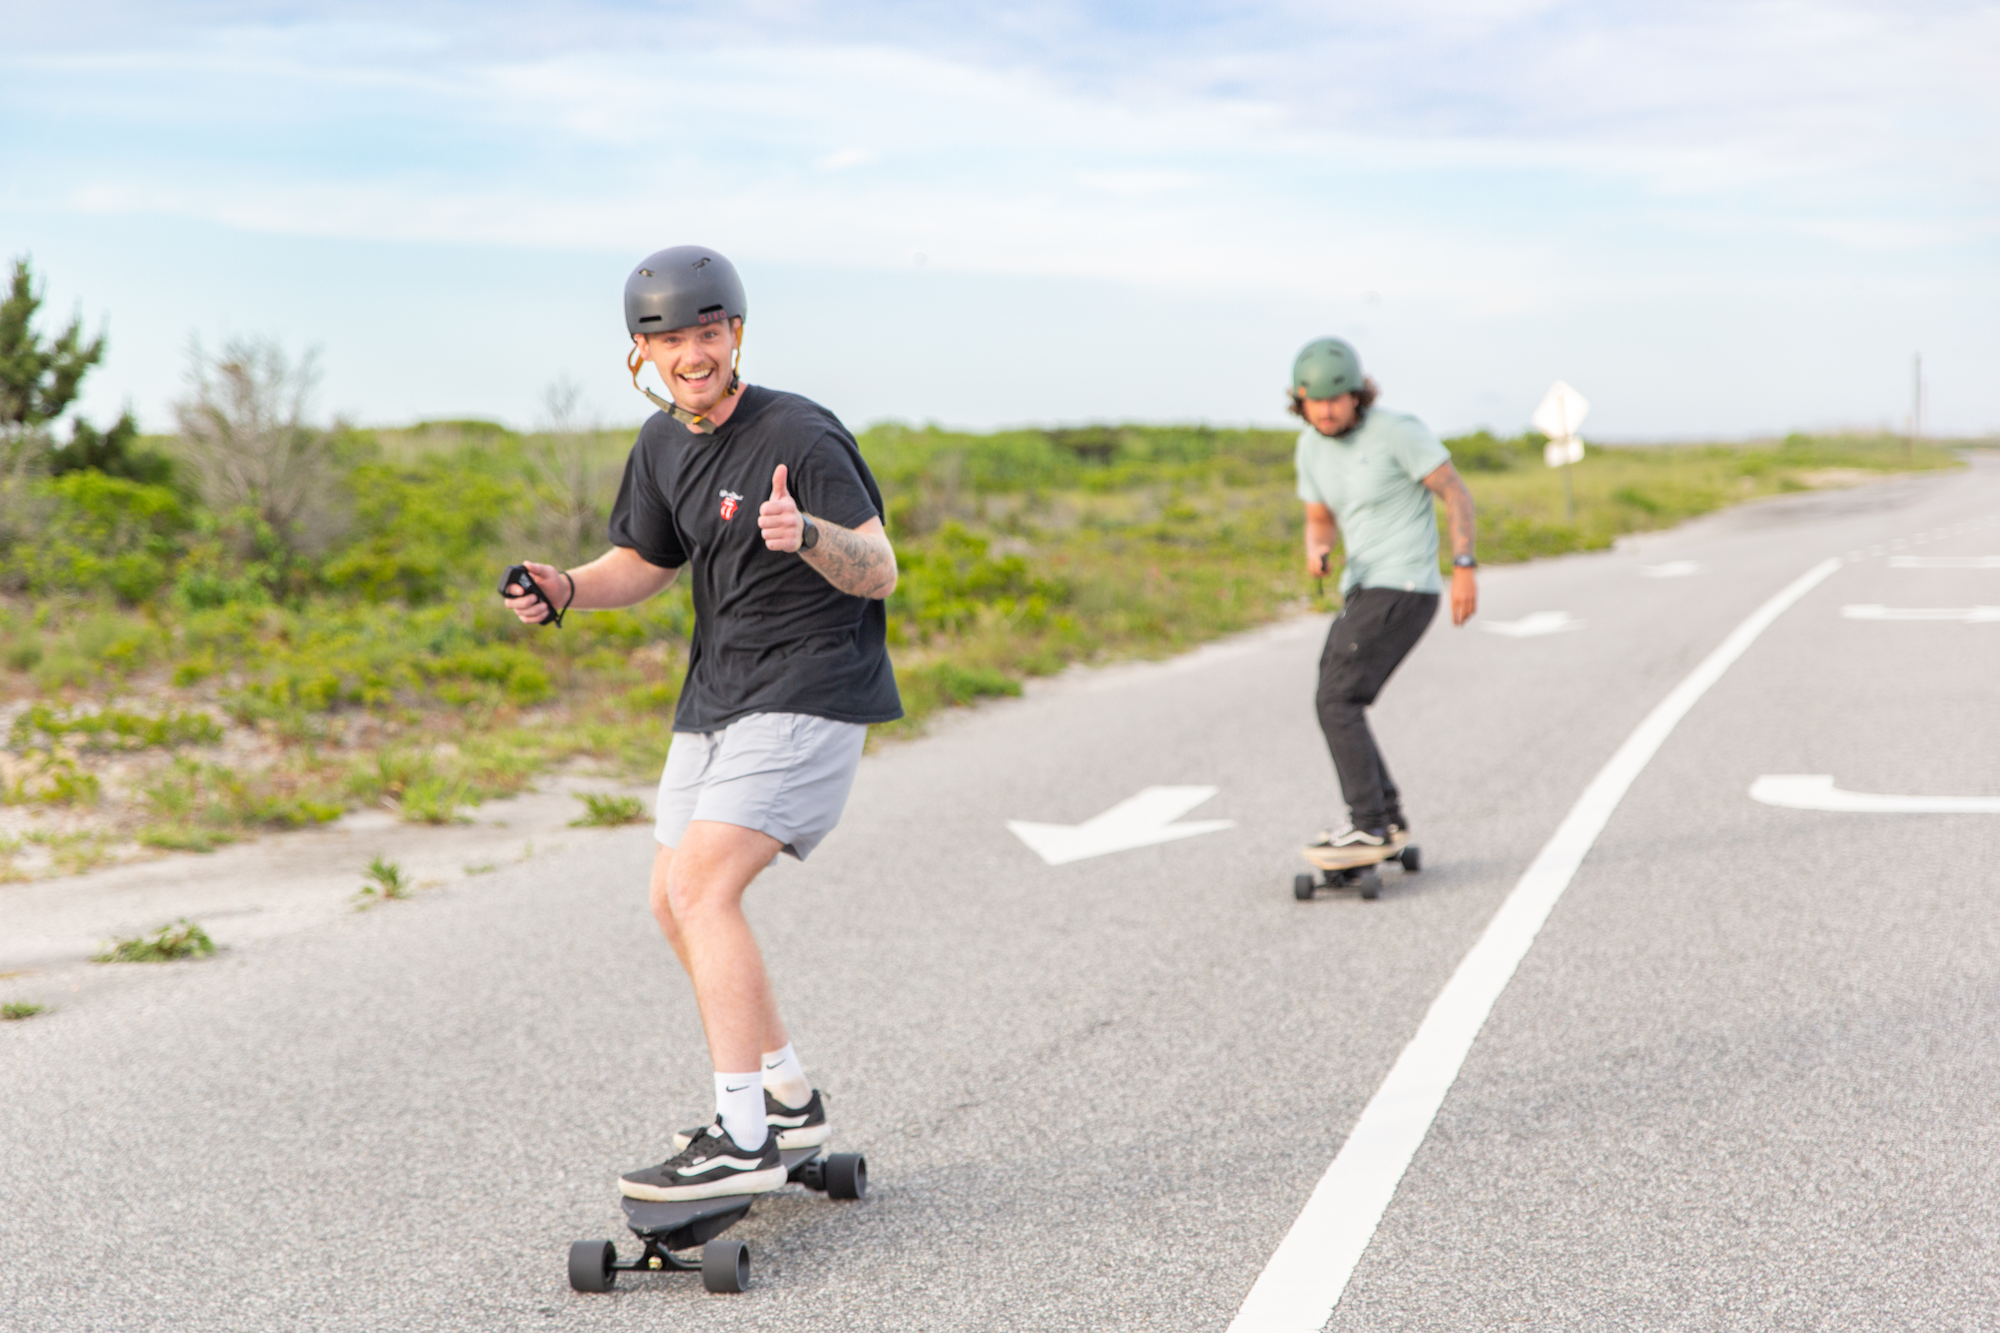 "E-skate" Together, Stay Together: The Benefits of Group Riding for Electric Skaters